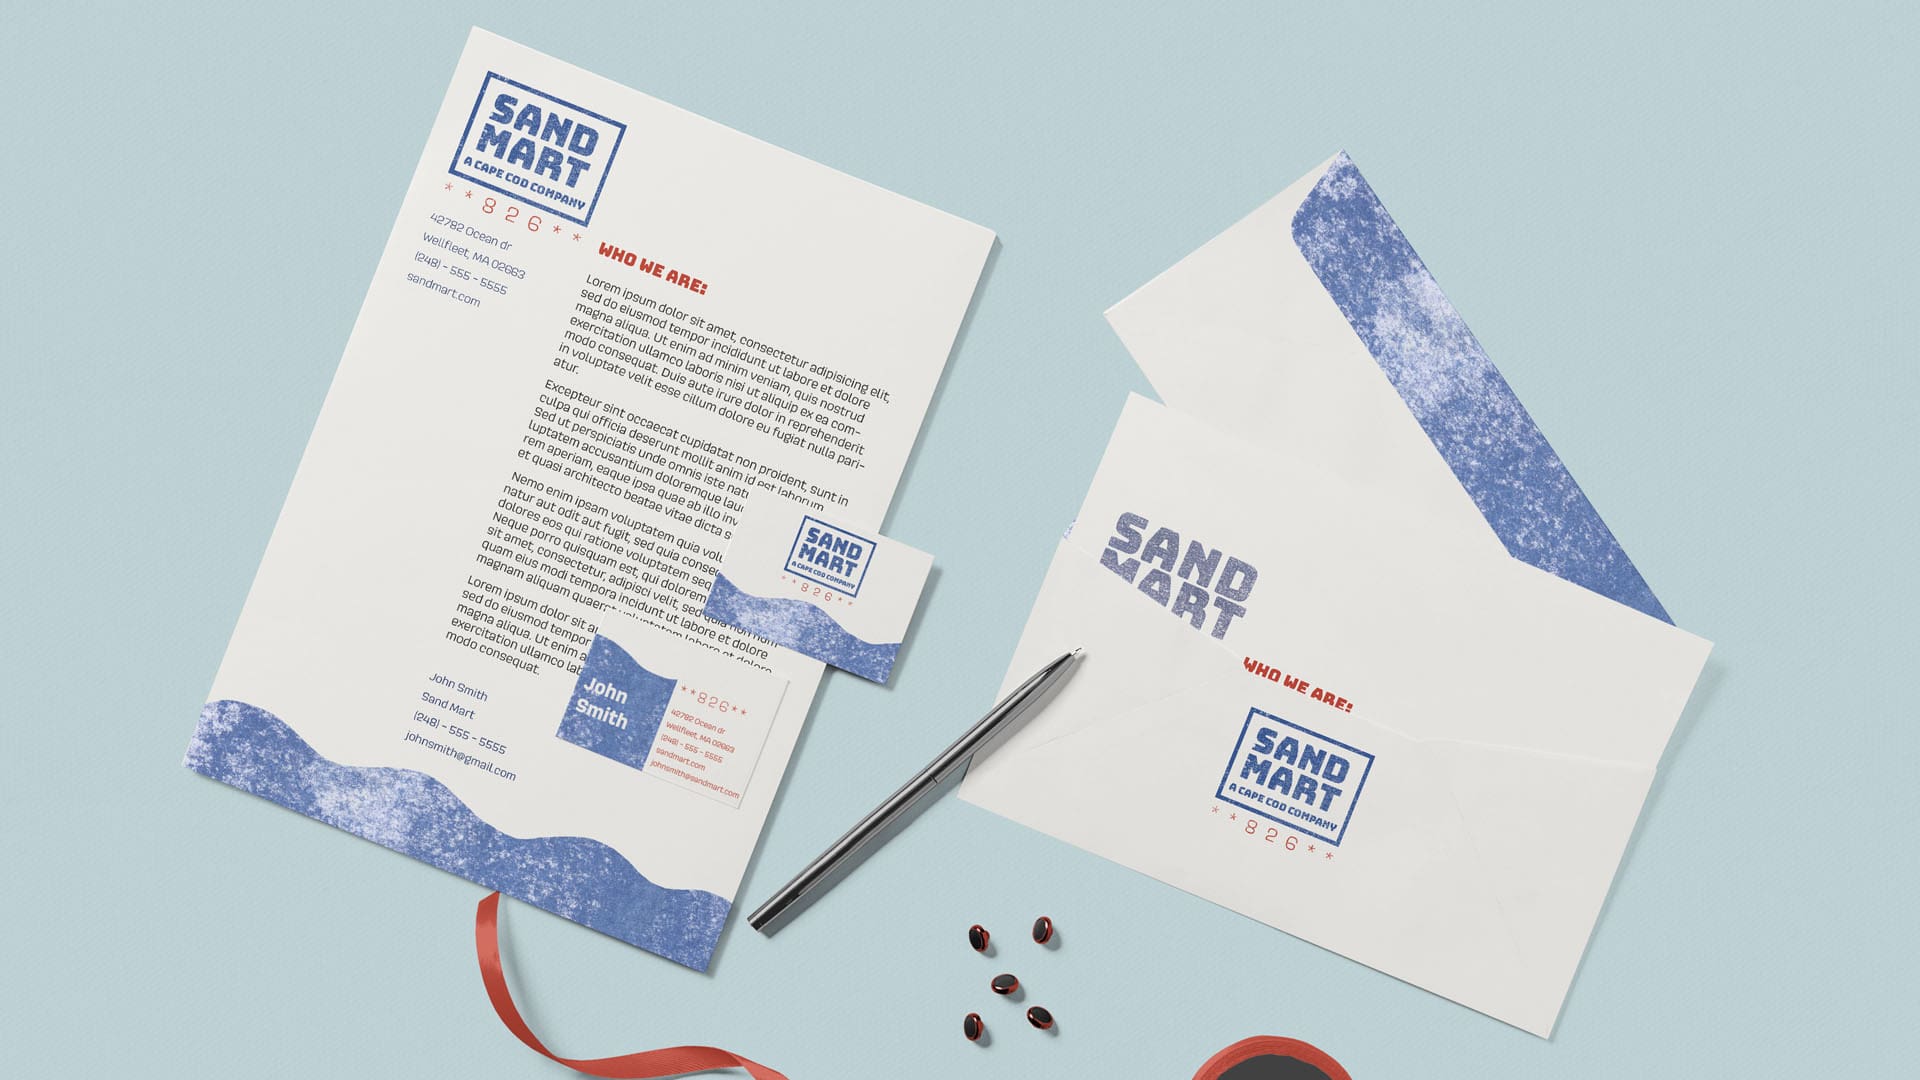 Branding for the company Sand Mart. The photo depicts a paper, bussiness card, black pen, and envelope against a pale blue background. The paper, card and envelope are white with small black text, a red header, and the blue logo of the company.